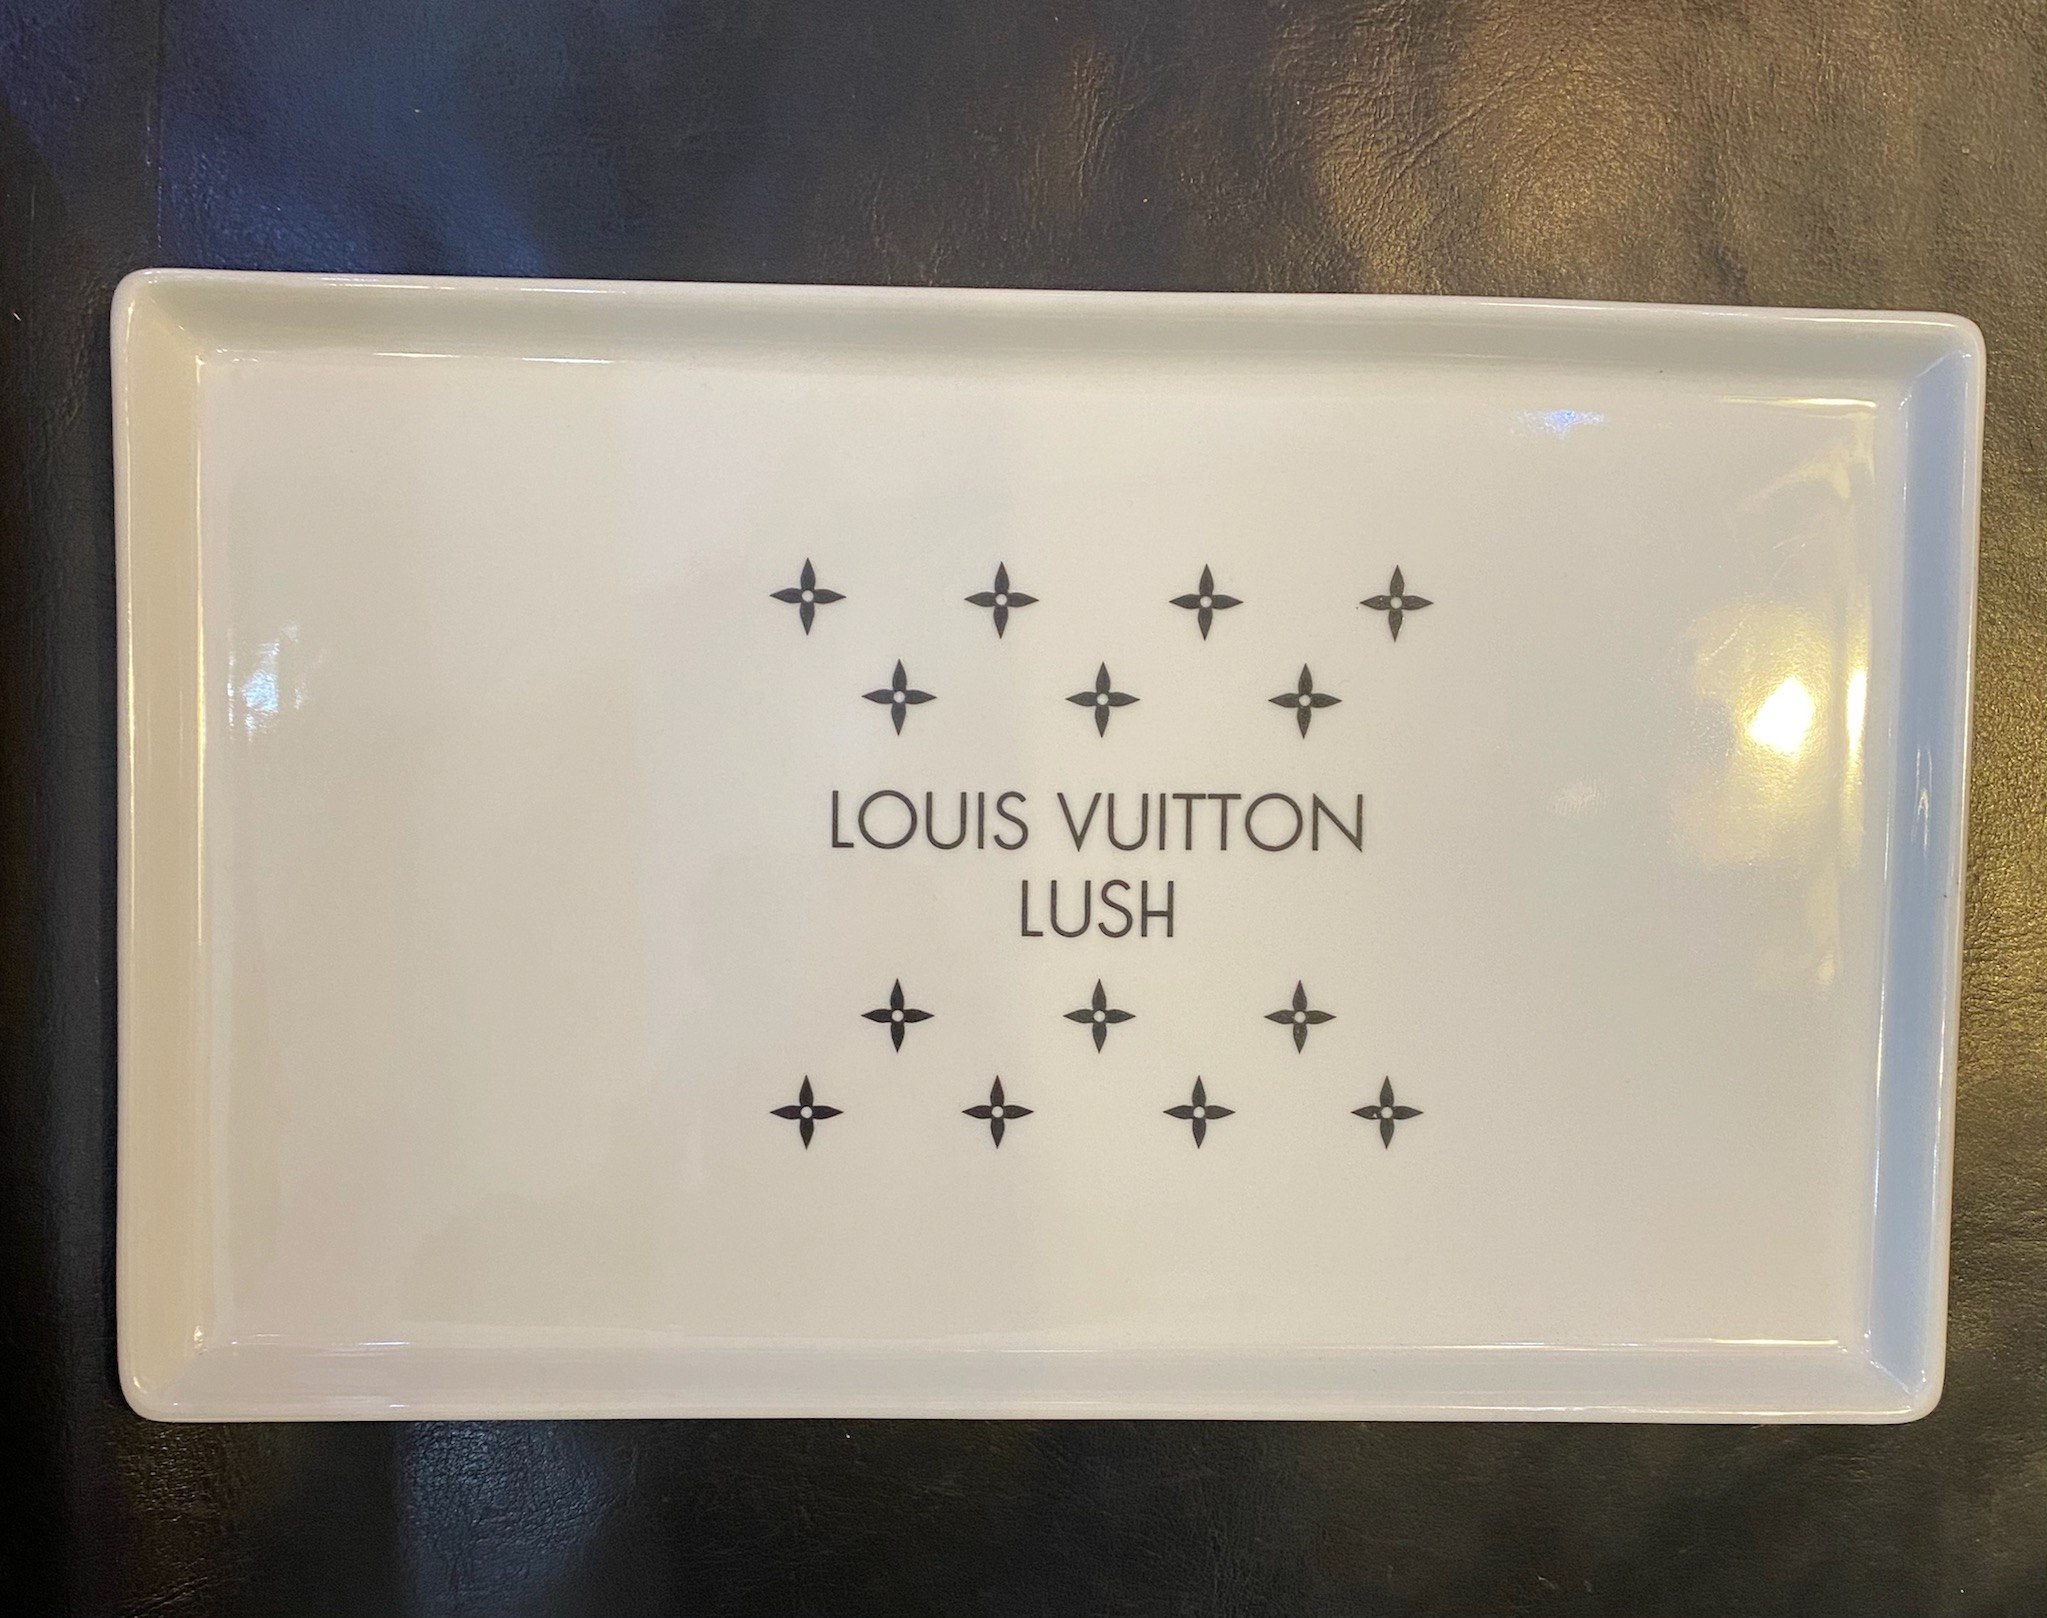 Designer LV Plates/ Dessert Plates and Tent Cards — Luxury Party Items